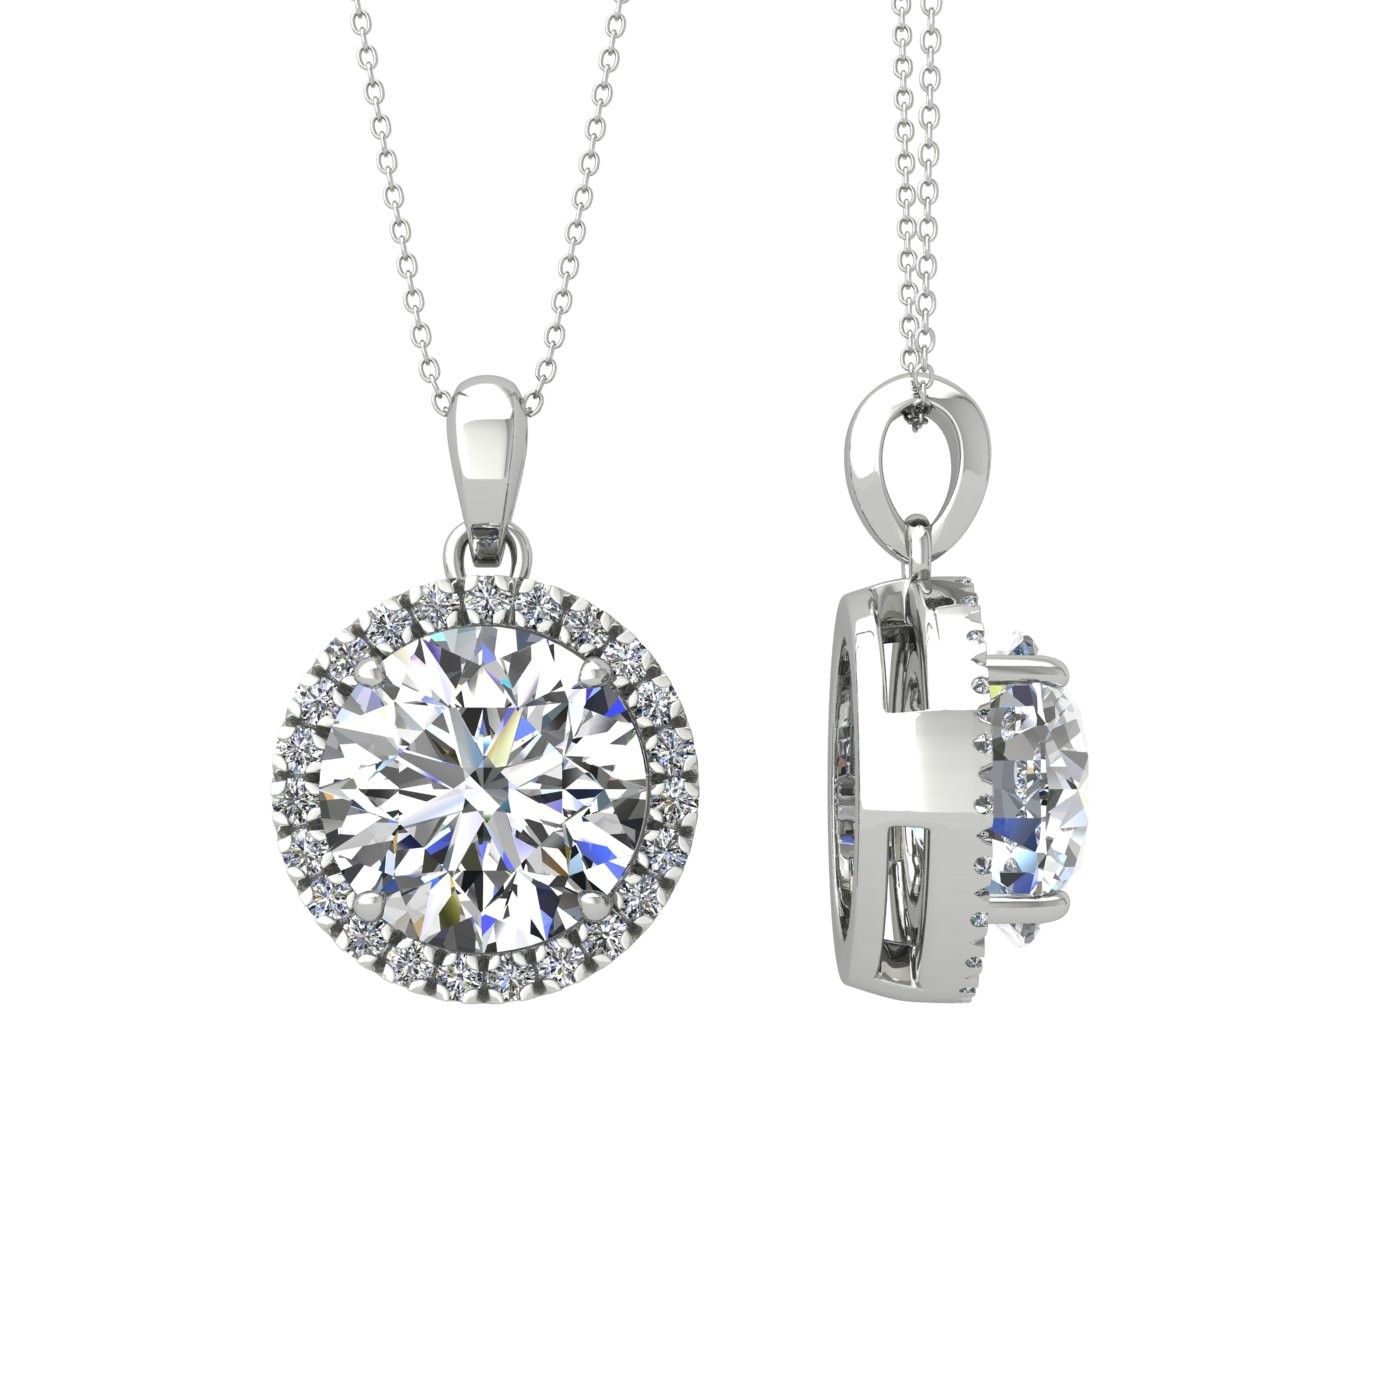 18k white gold  0,3 ct 4 prong round shape diamond pendant with diamond pavÉ set halo including chain seperate from the pendant Photos & images